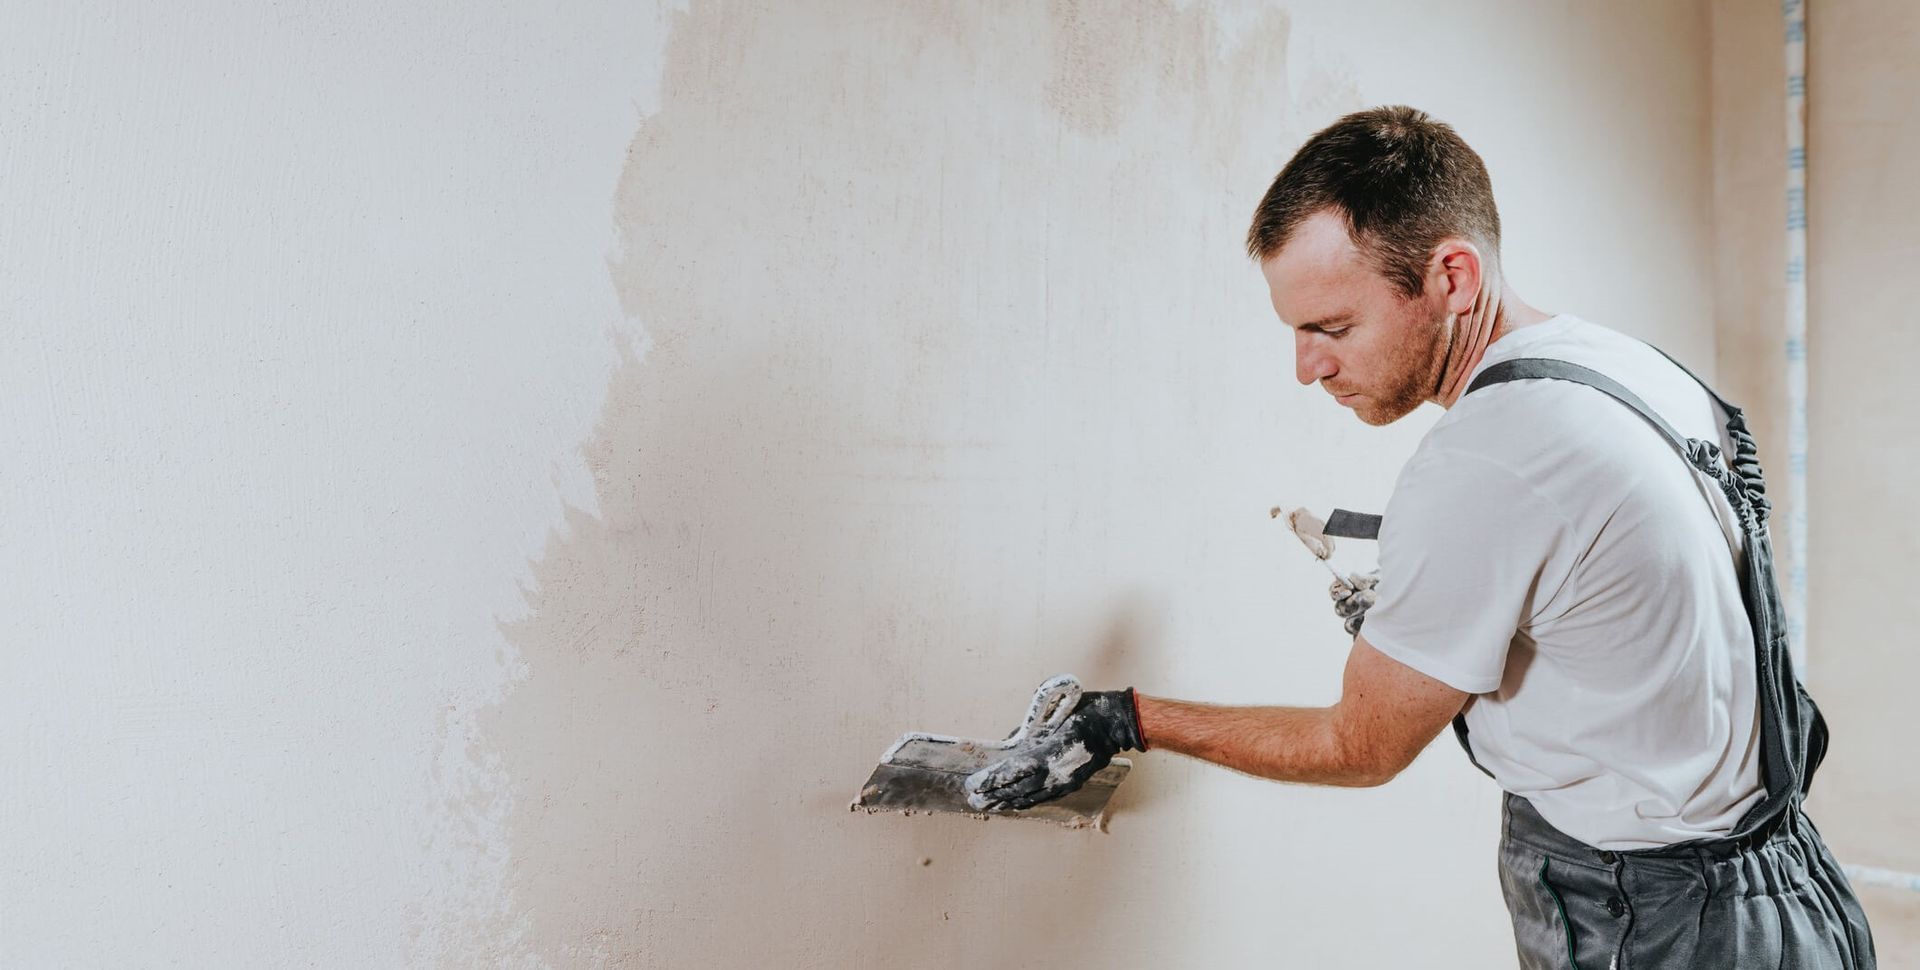 Drywall contractor performing wall texturing services